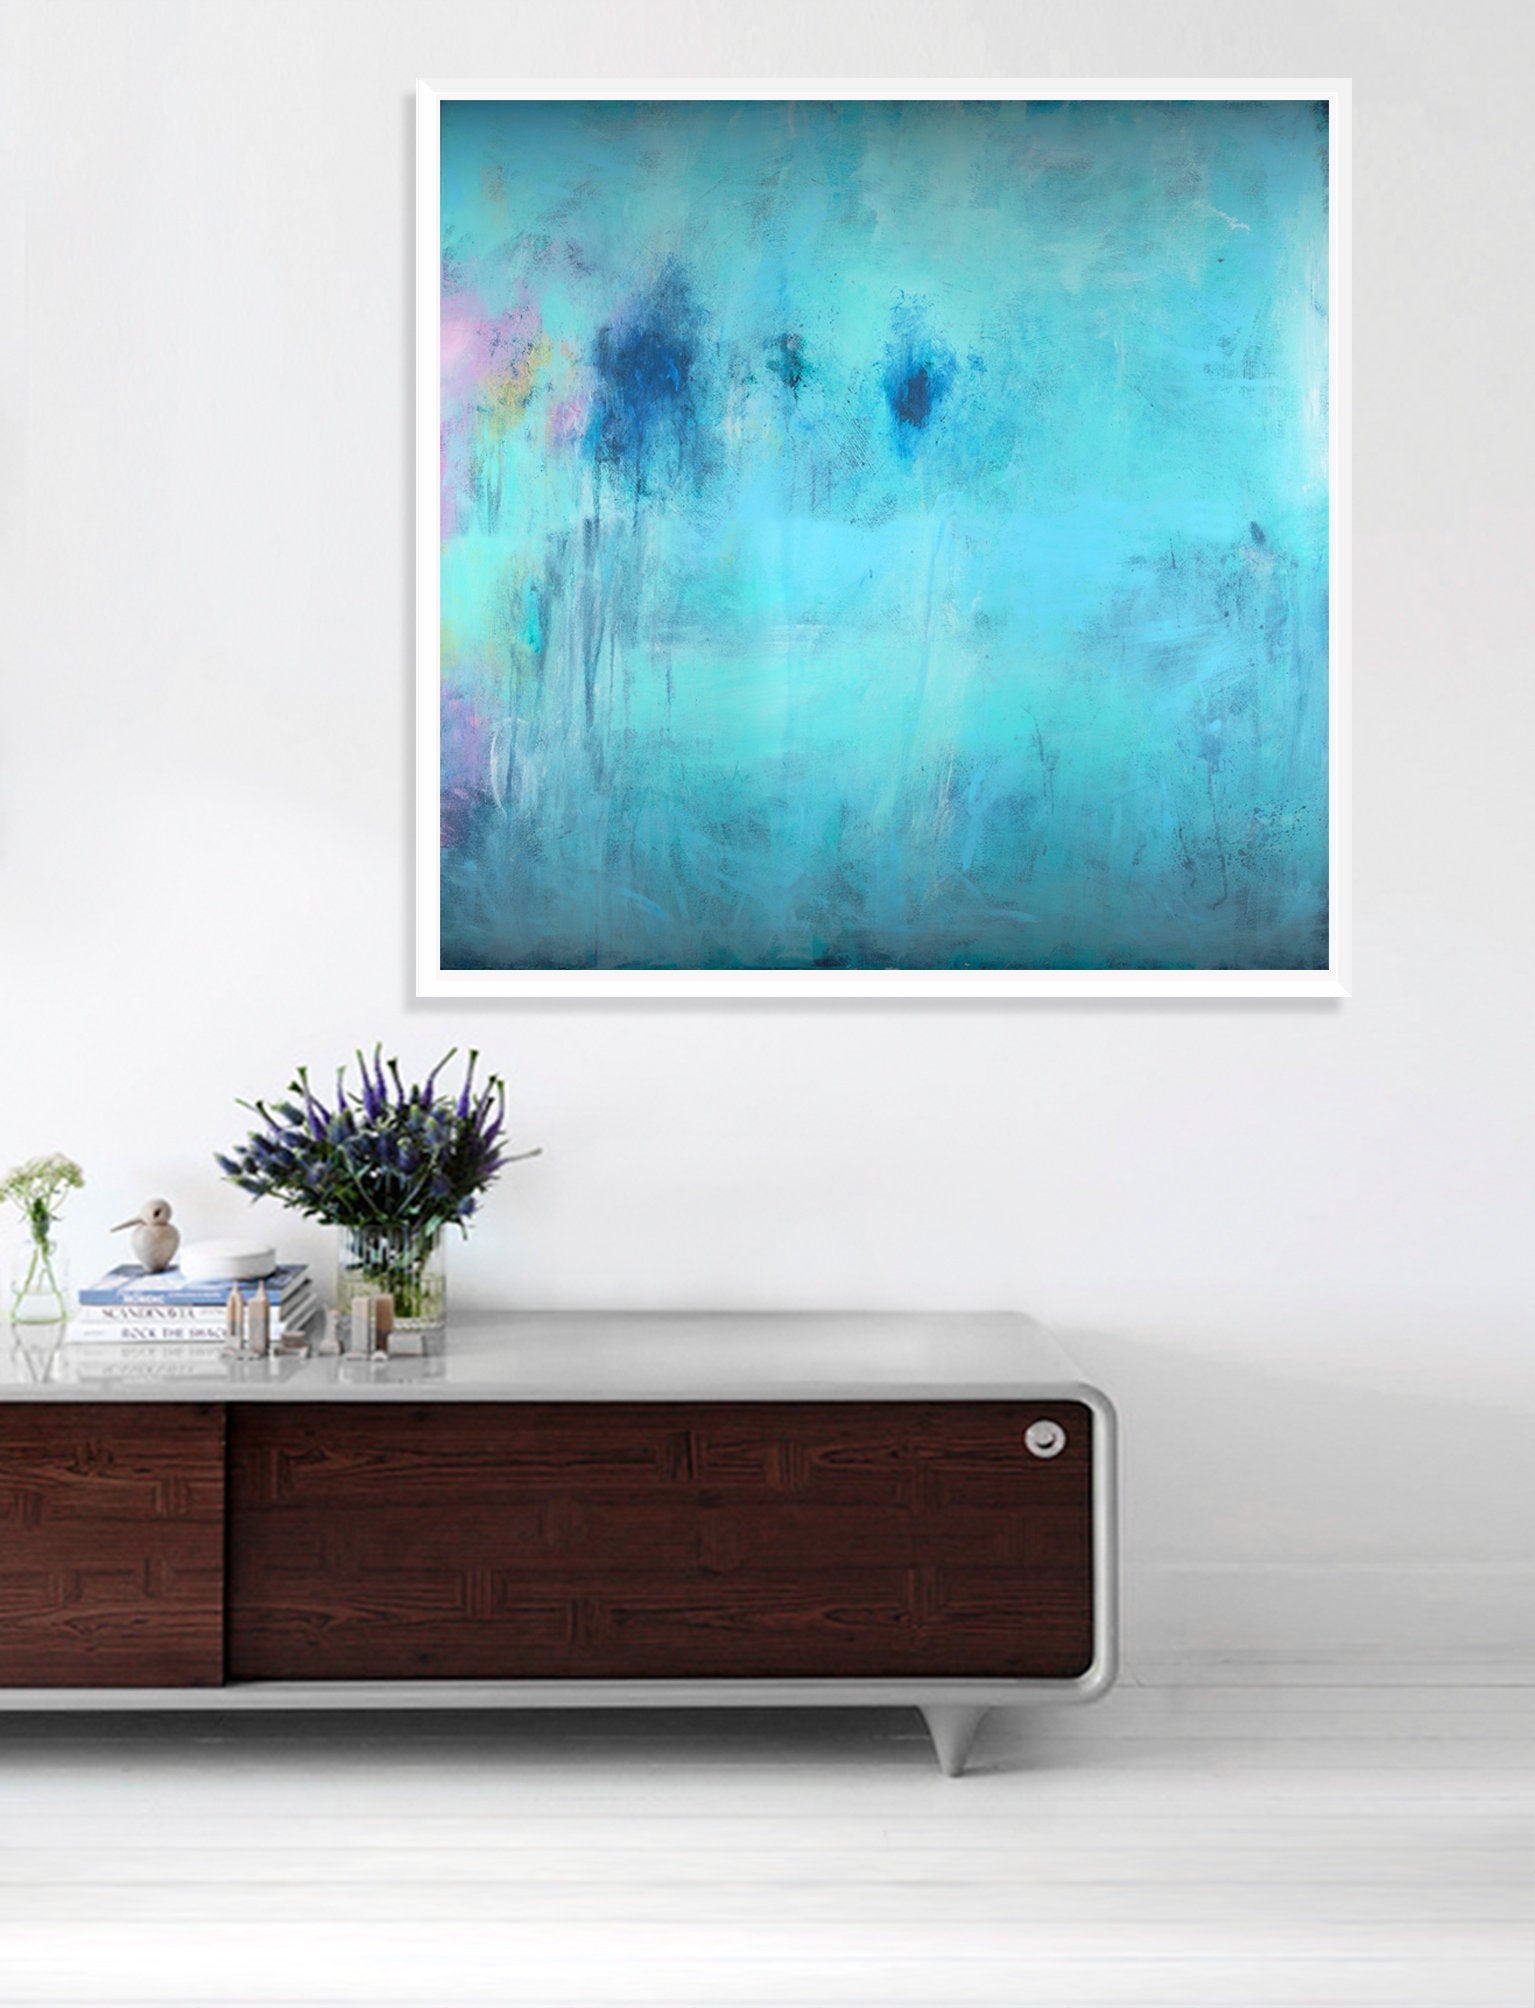 Abstract Print, abstract painting, Teal And Blue, Architecture Art, Modern Art, Apartment Decor, Living Room Wall Art, Large Print - camilomattis.com